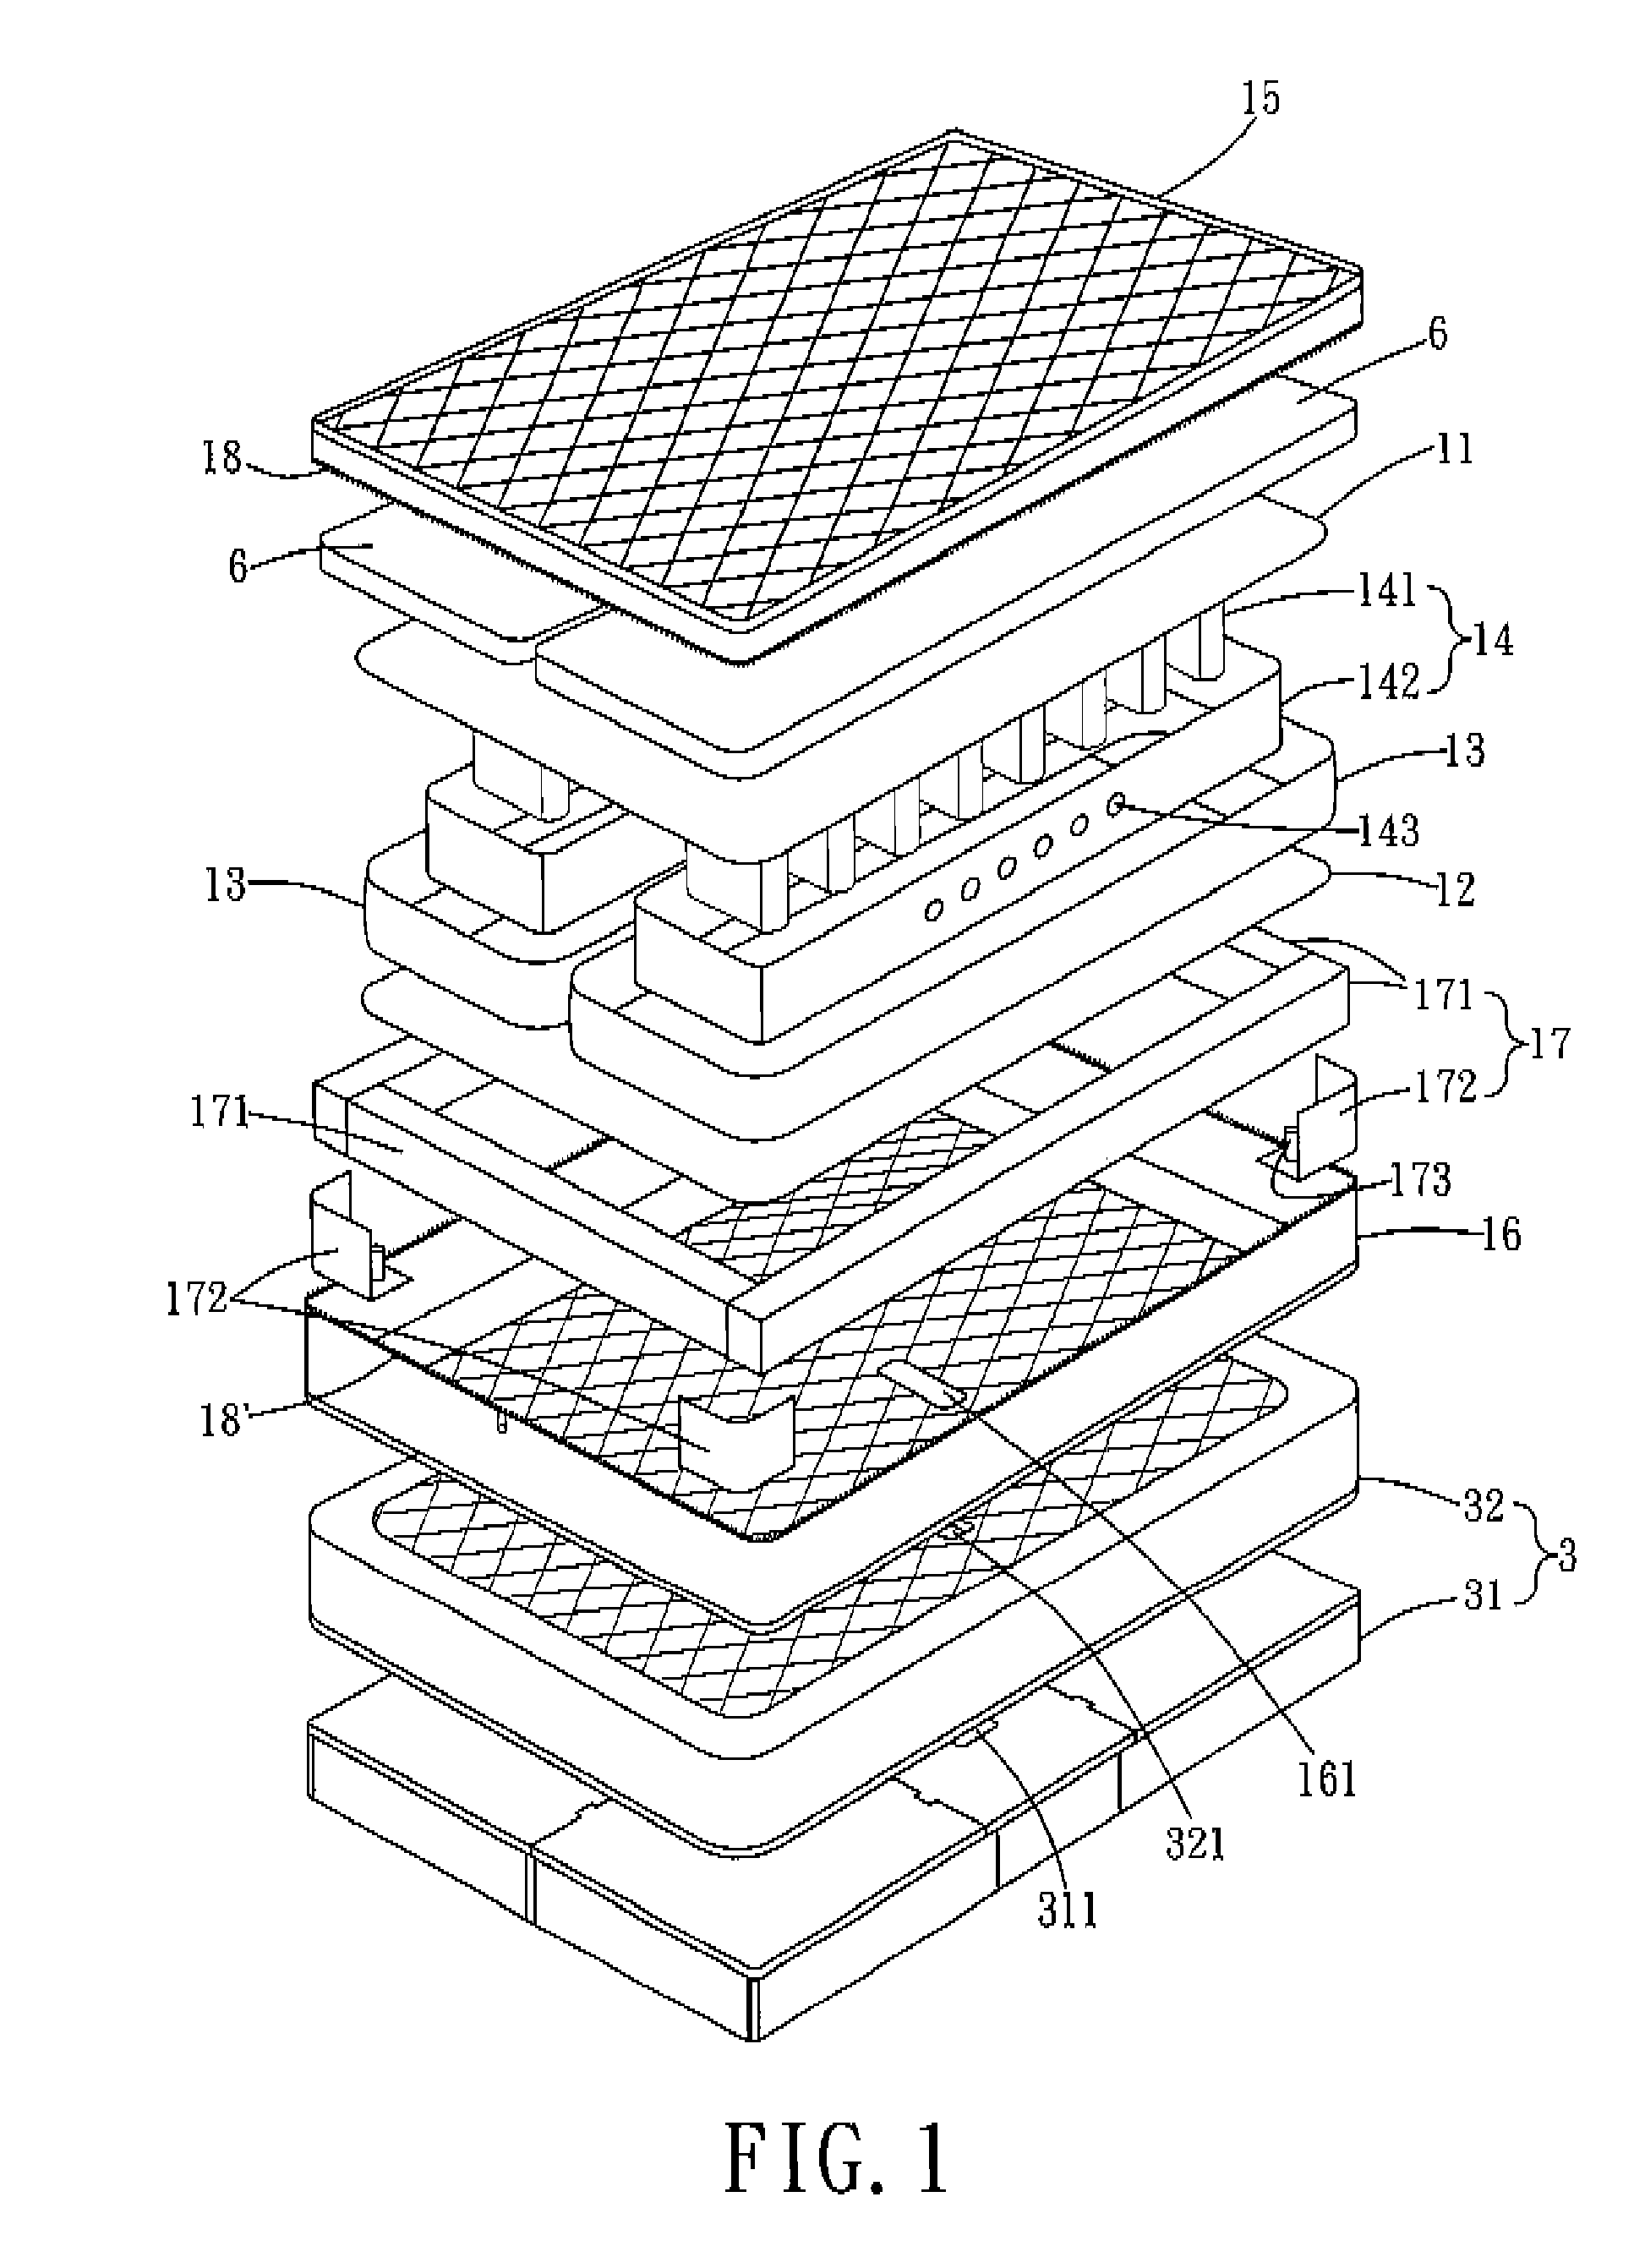 Inflatable bed having a built-in electric air pump unit for inflating a mattress assembly